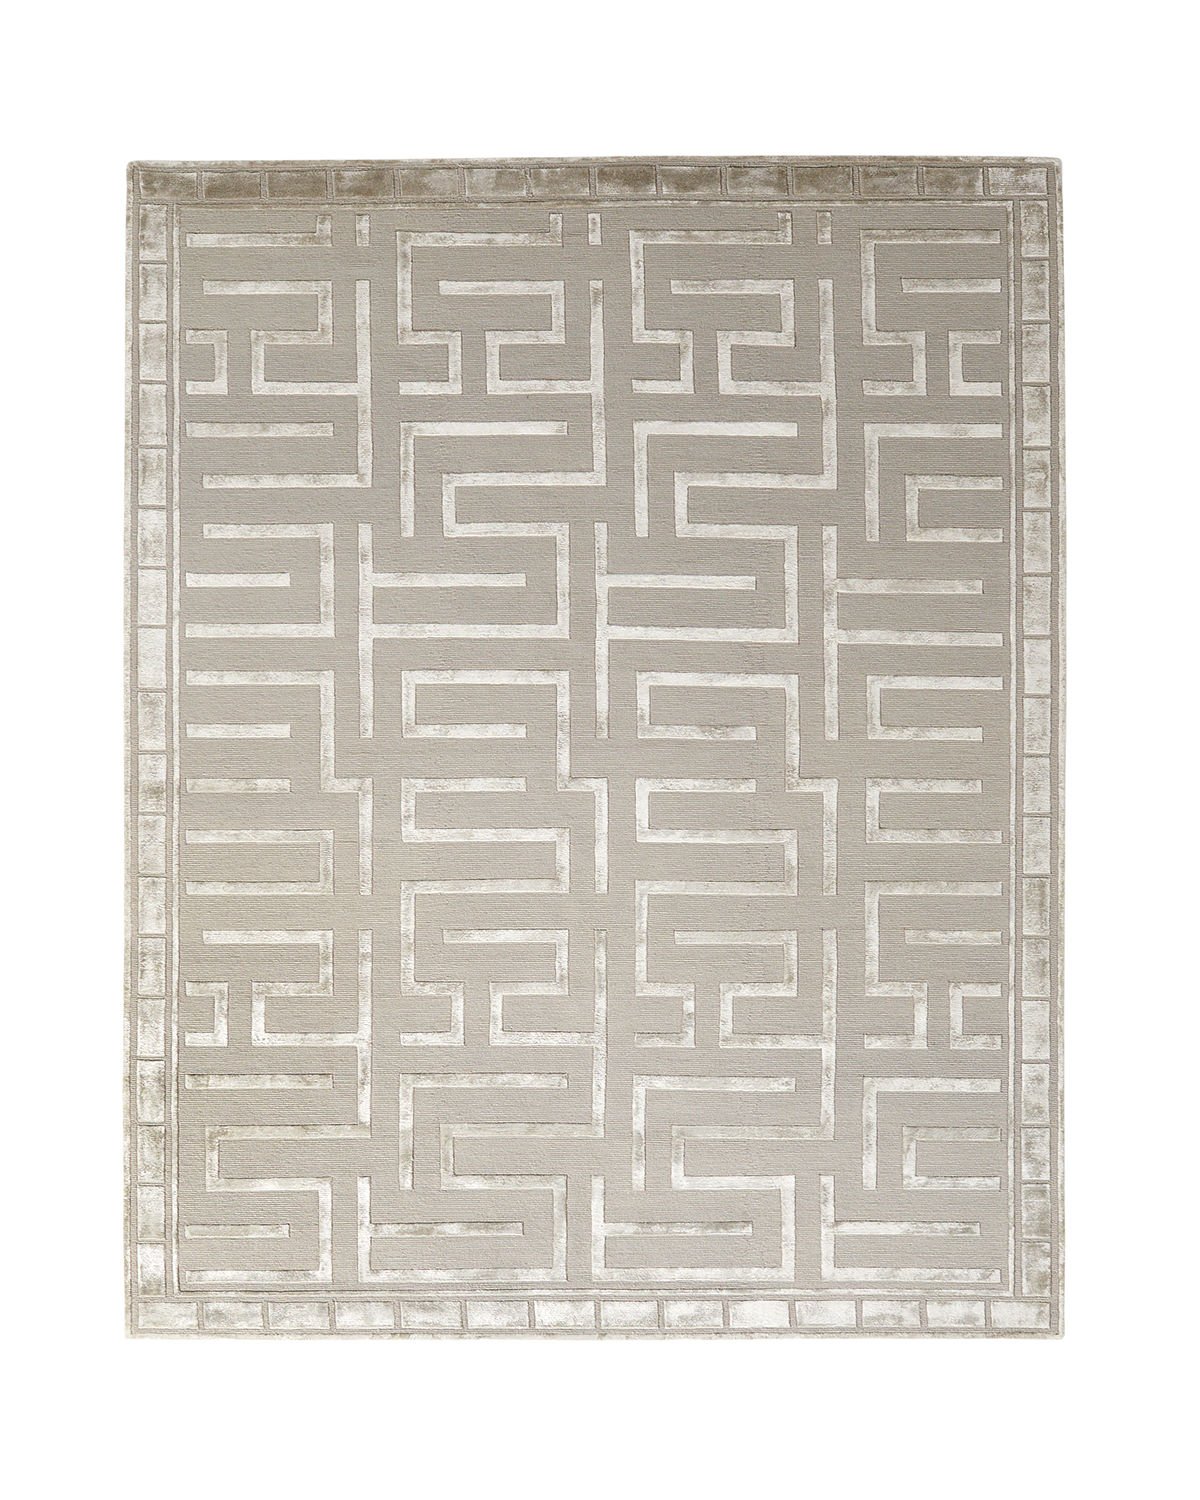 Rowling Maze Hand-Knotted Rug, 9' x 12'